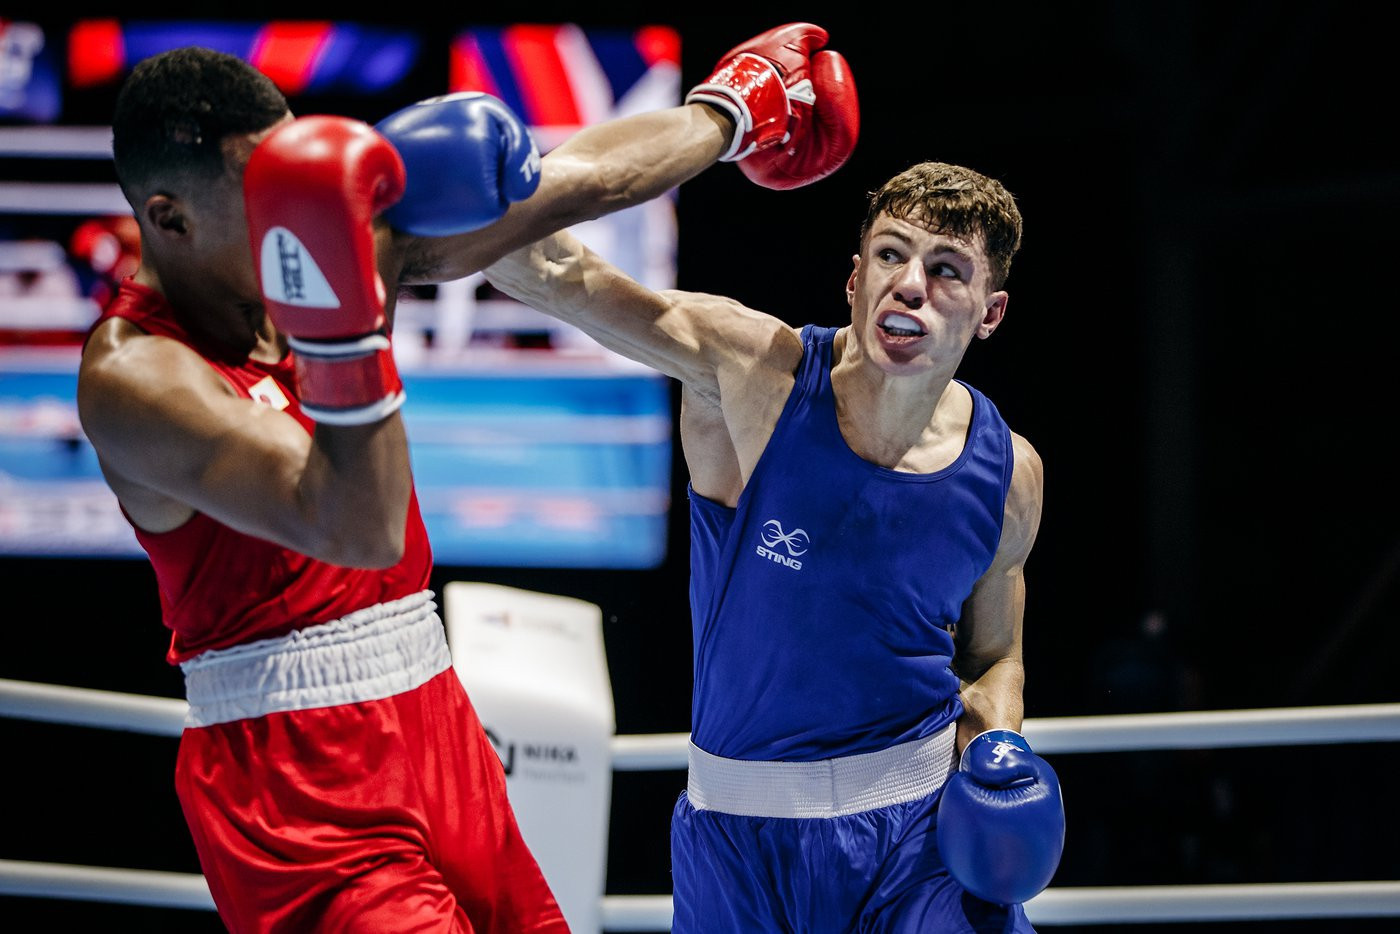 AIBA Men's World Championships 2019: Day 12 of competition